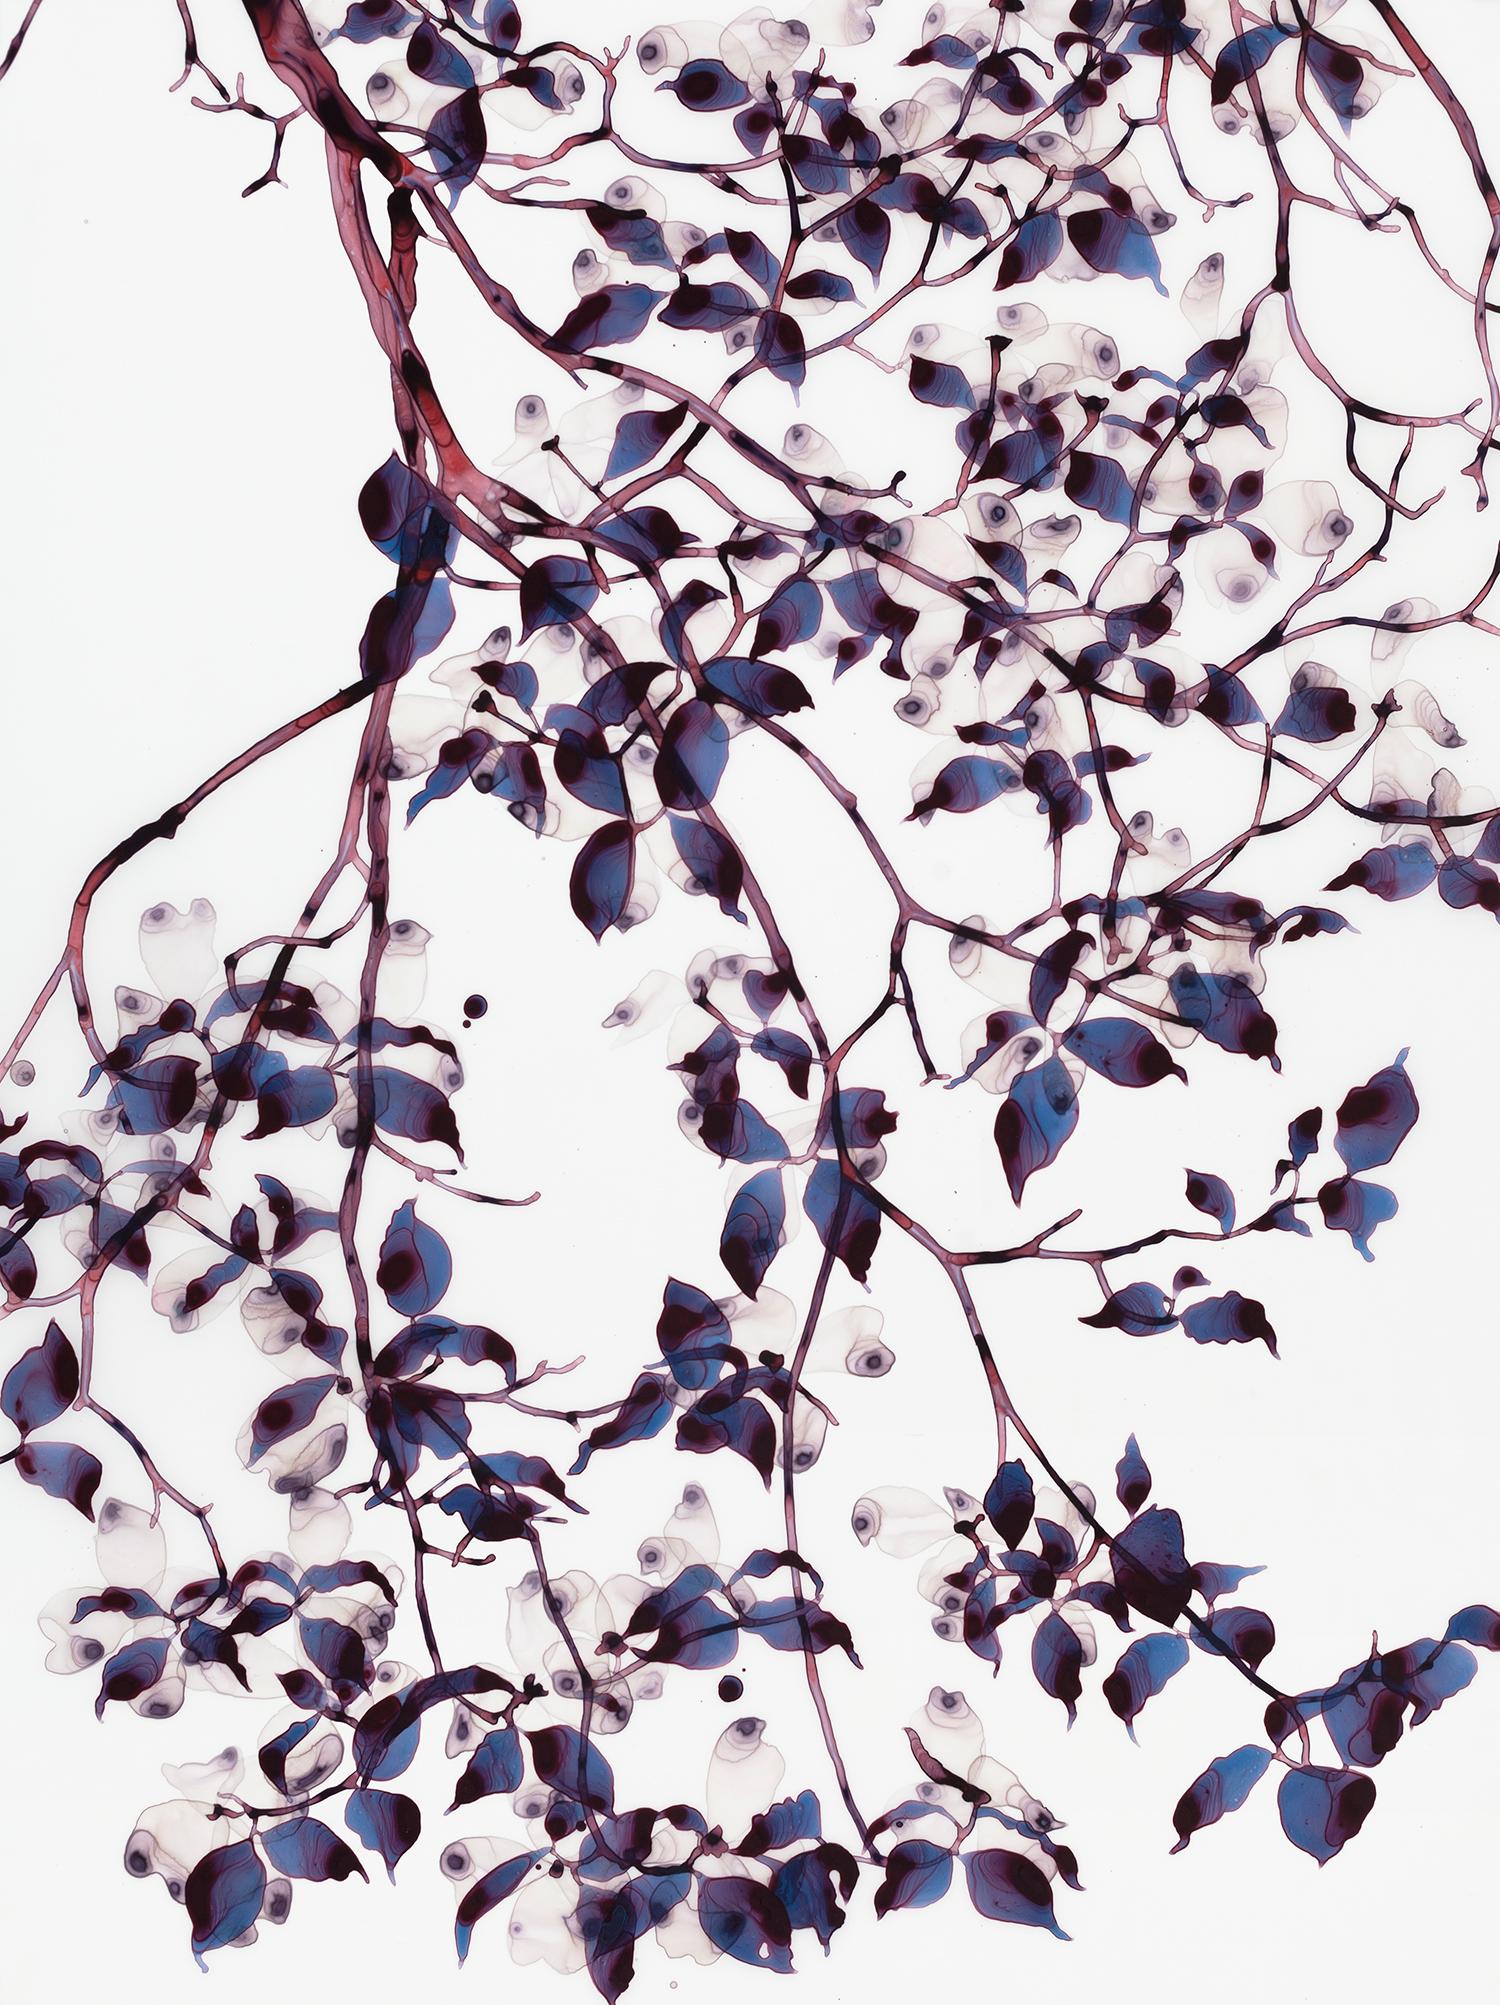 Layers of foliage in pale lavender purple and dark midnight blue grace delicate burgundy and dark brown branches on the pristine white background of this vertical painting in acrylic on Mylar mounted on acrylic panel. 

Jackie Battenfield’s